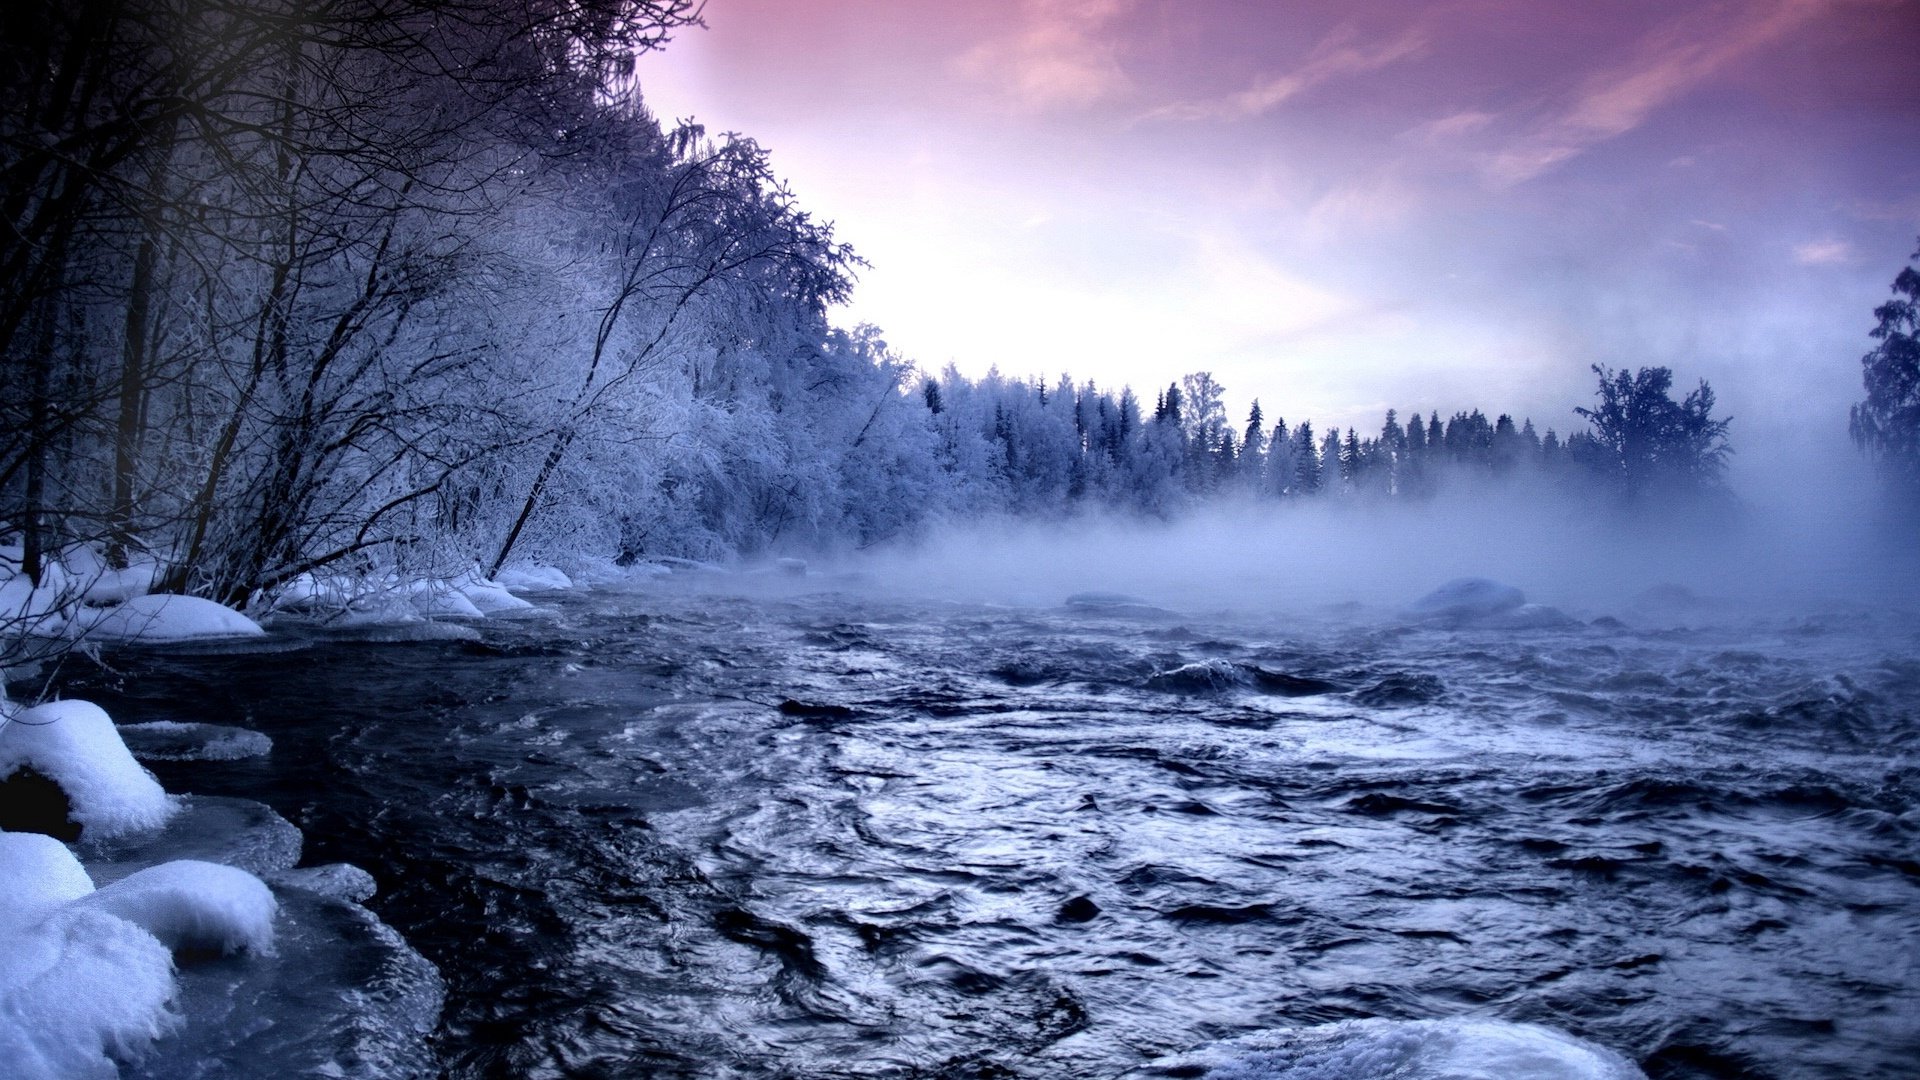 hd wallpaper with a landscape with river and snow in the winter Wallpapers ...